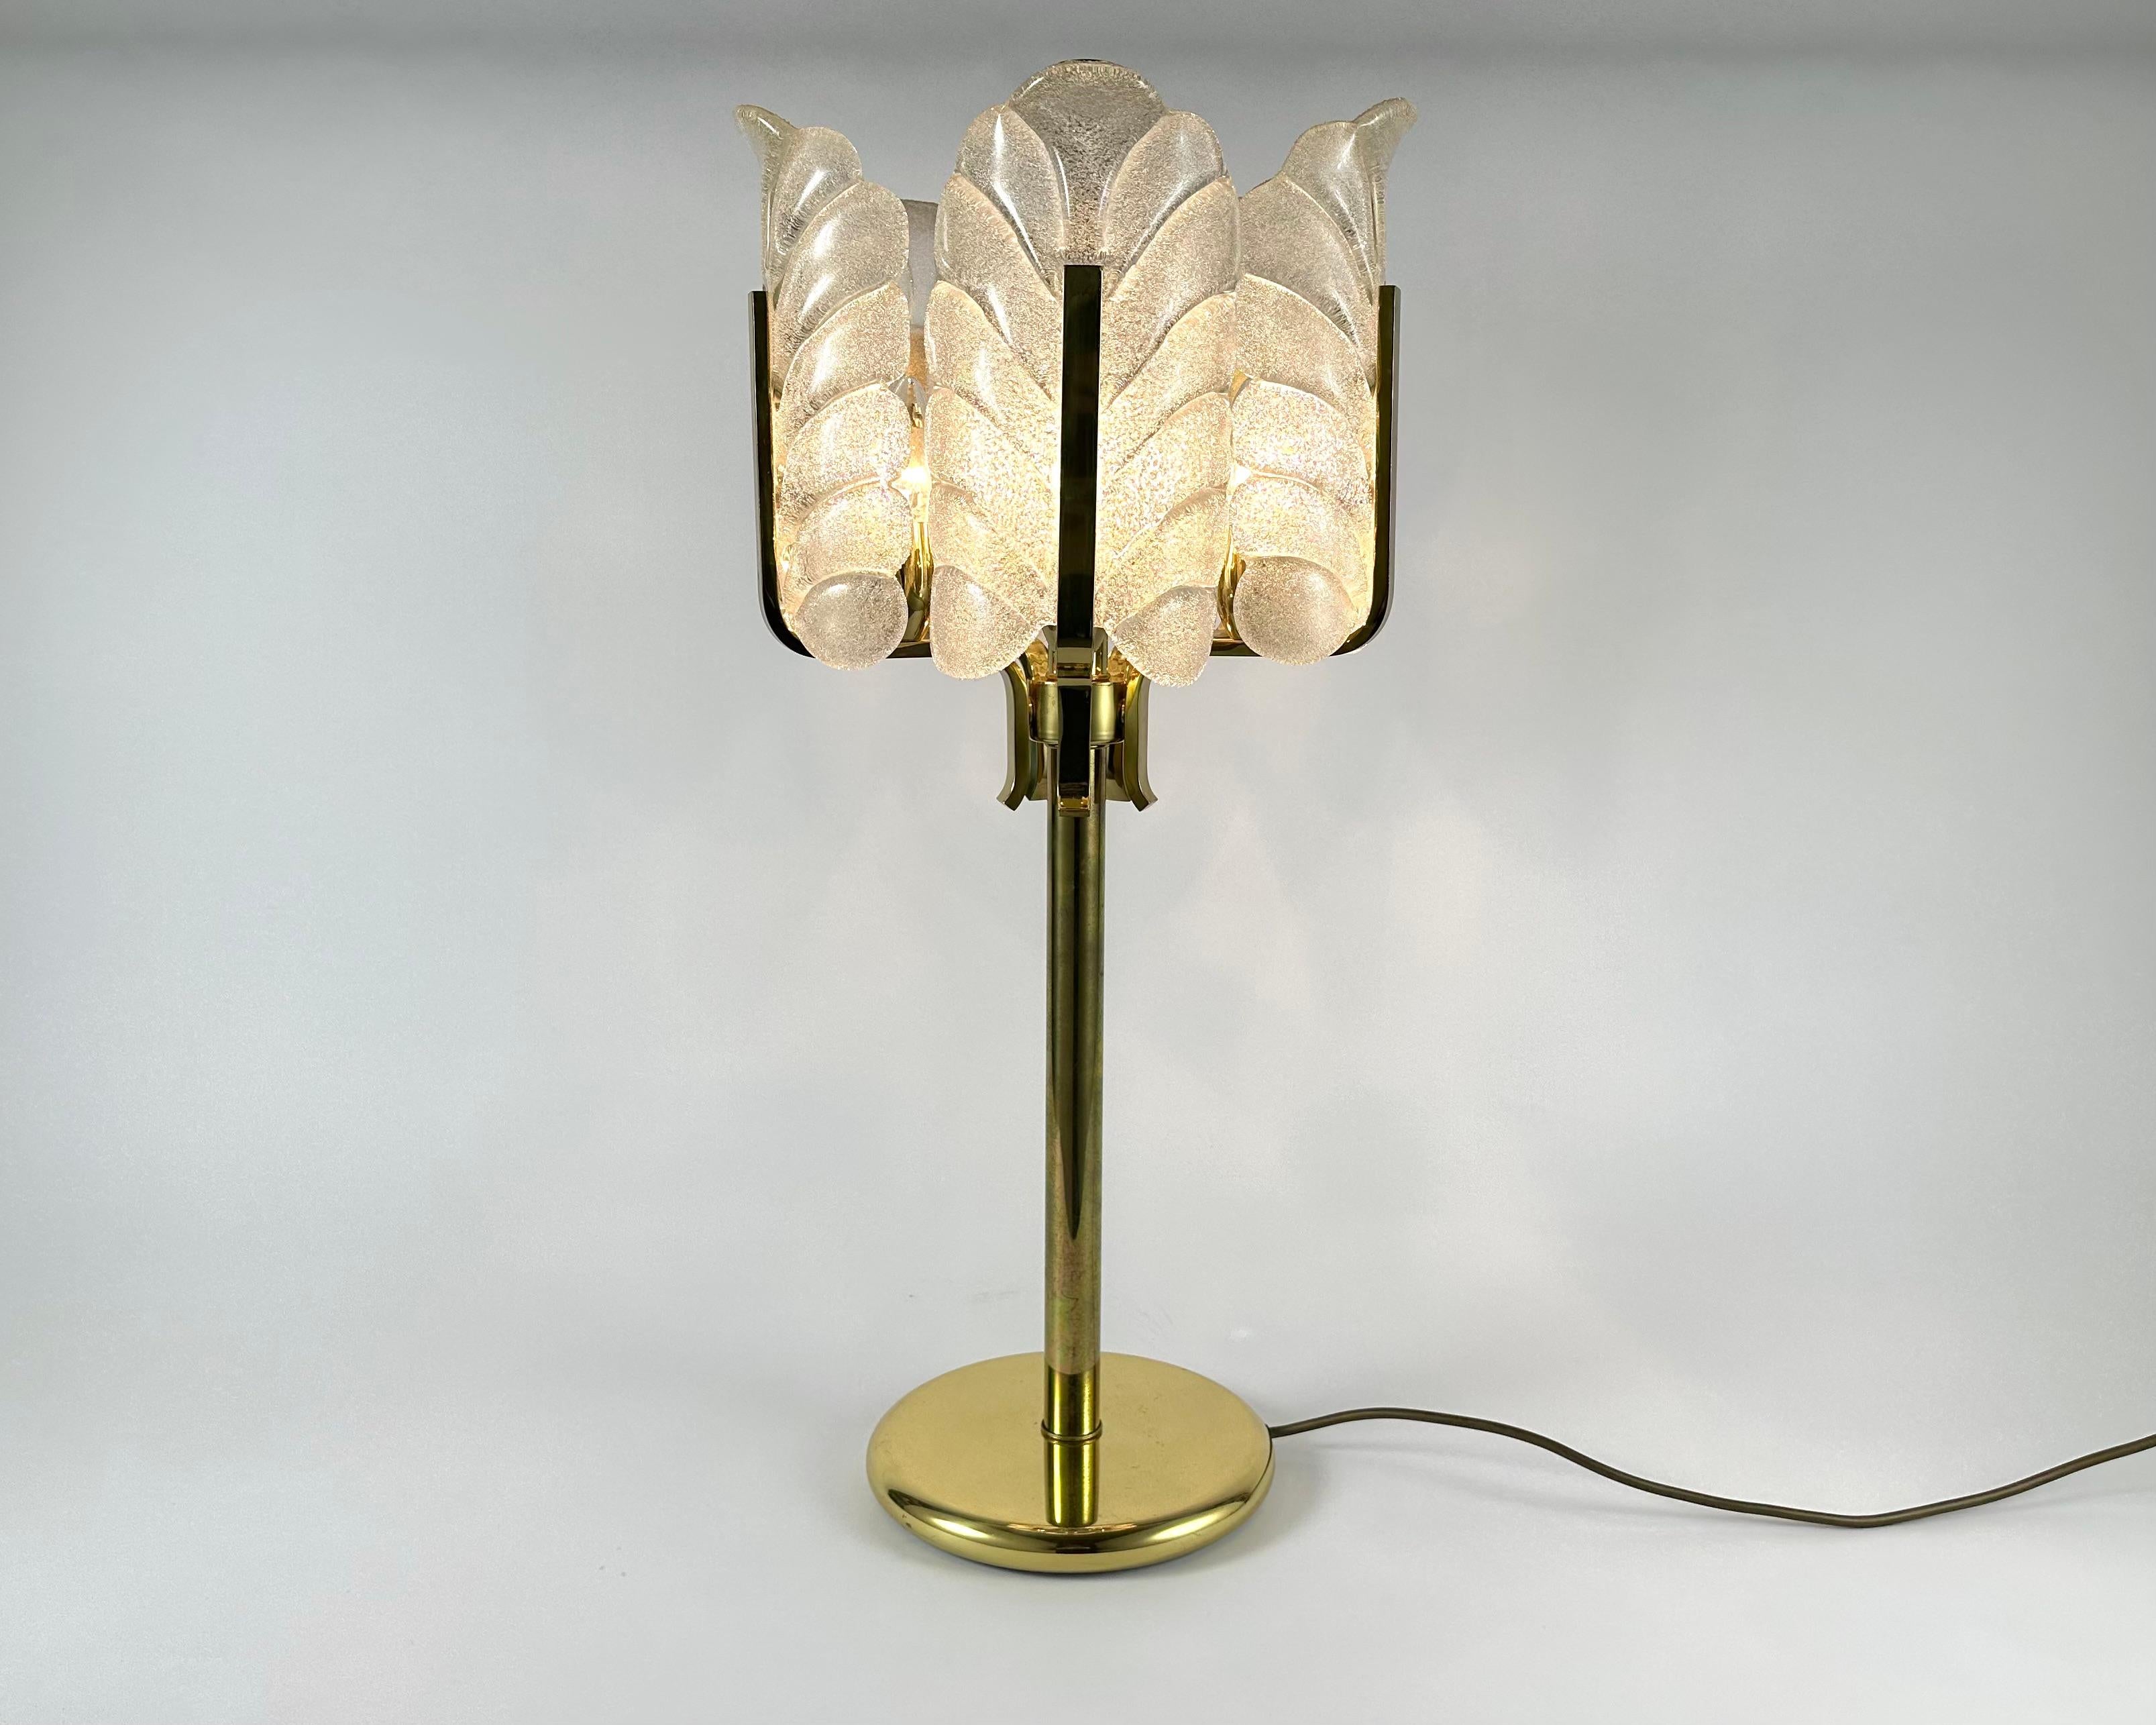 This sculptural Hollywood regency style table lamp was designed by Carl Fagerlund for the Swedish glasswork company Orrefors Lighting in the 1960s.

The lamp is made of shiny brass frame with five frosted and textured glass acanthus leaves which